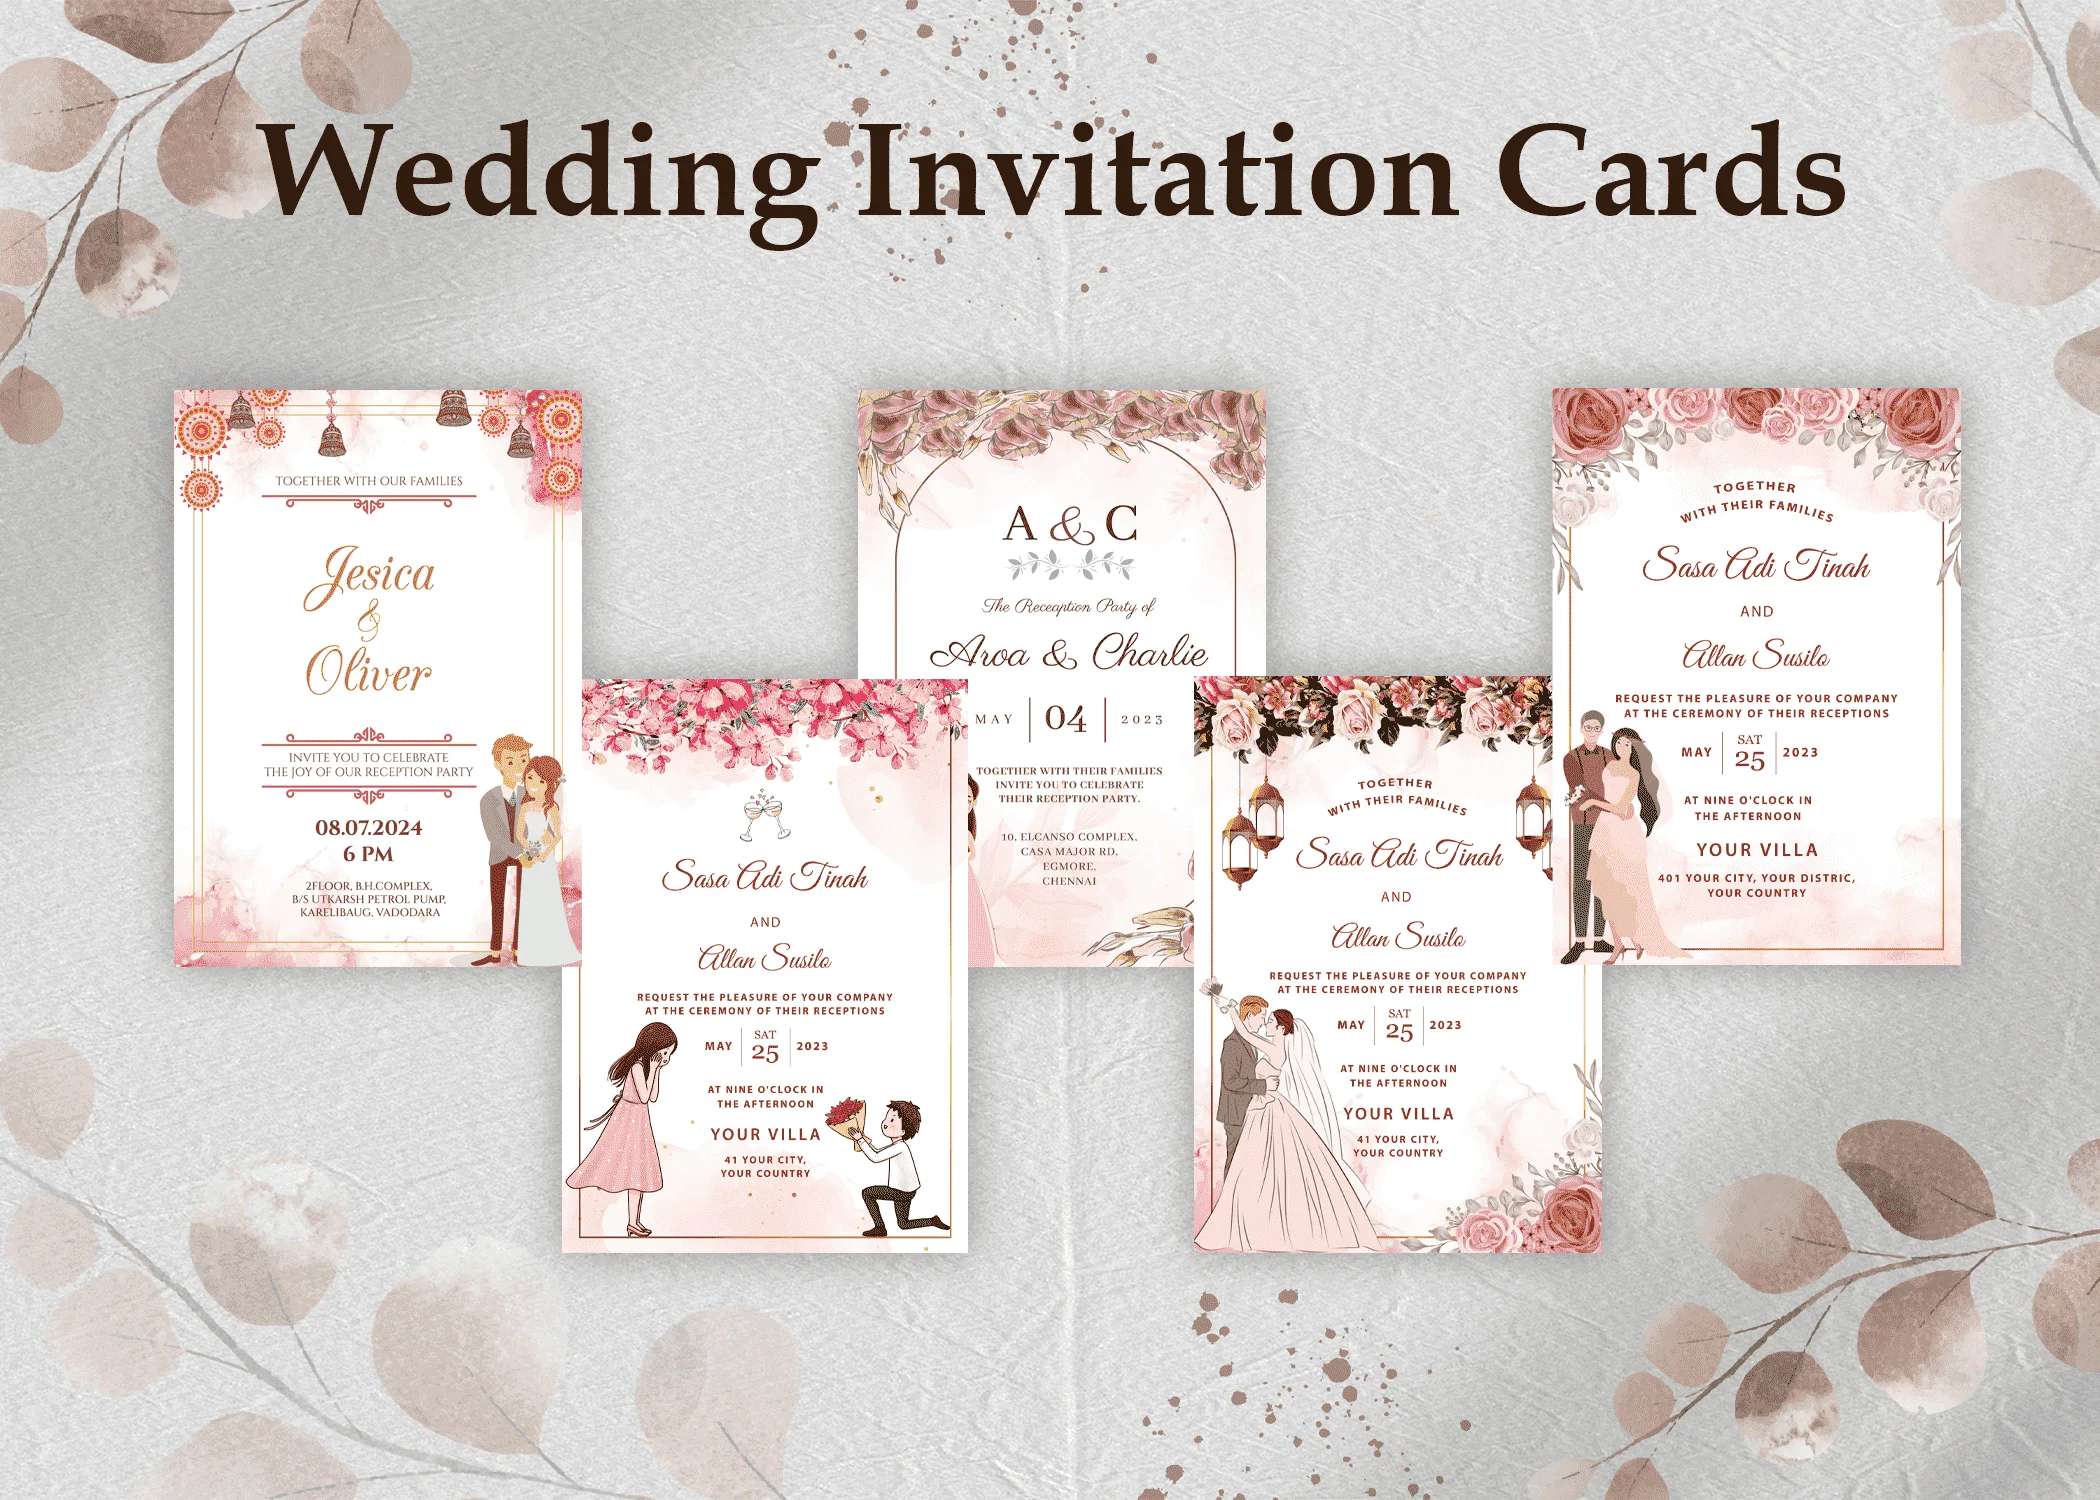 Wedding Invitation Cards: A Timeless Tradition